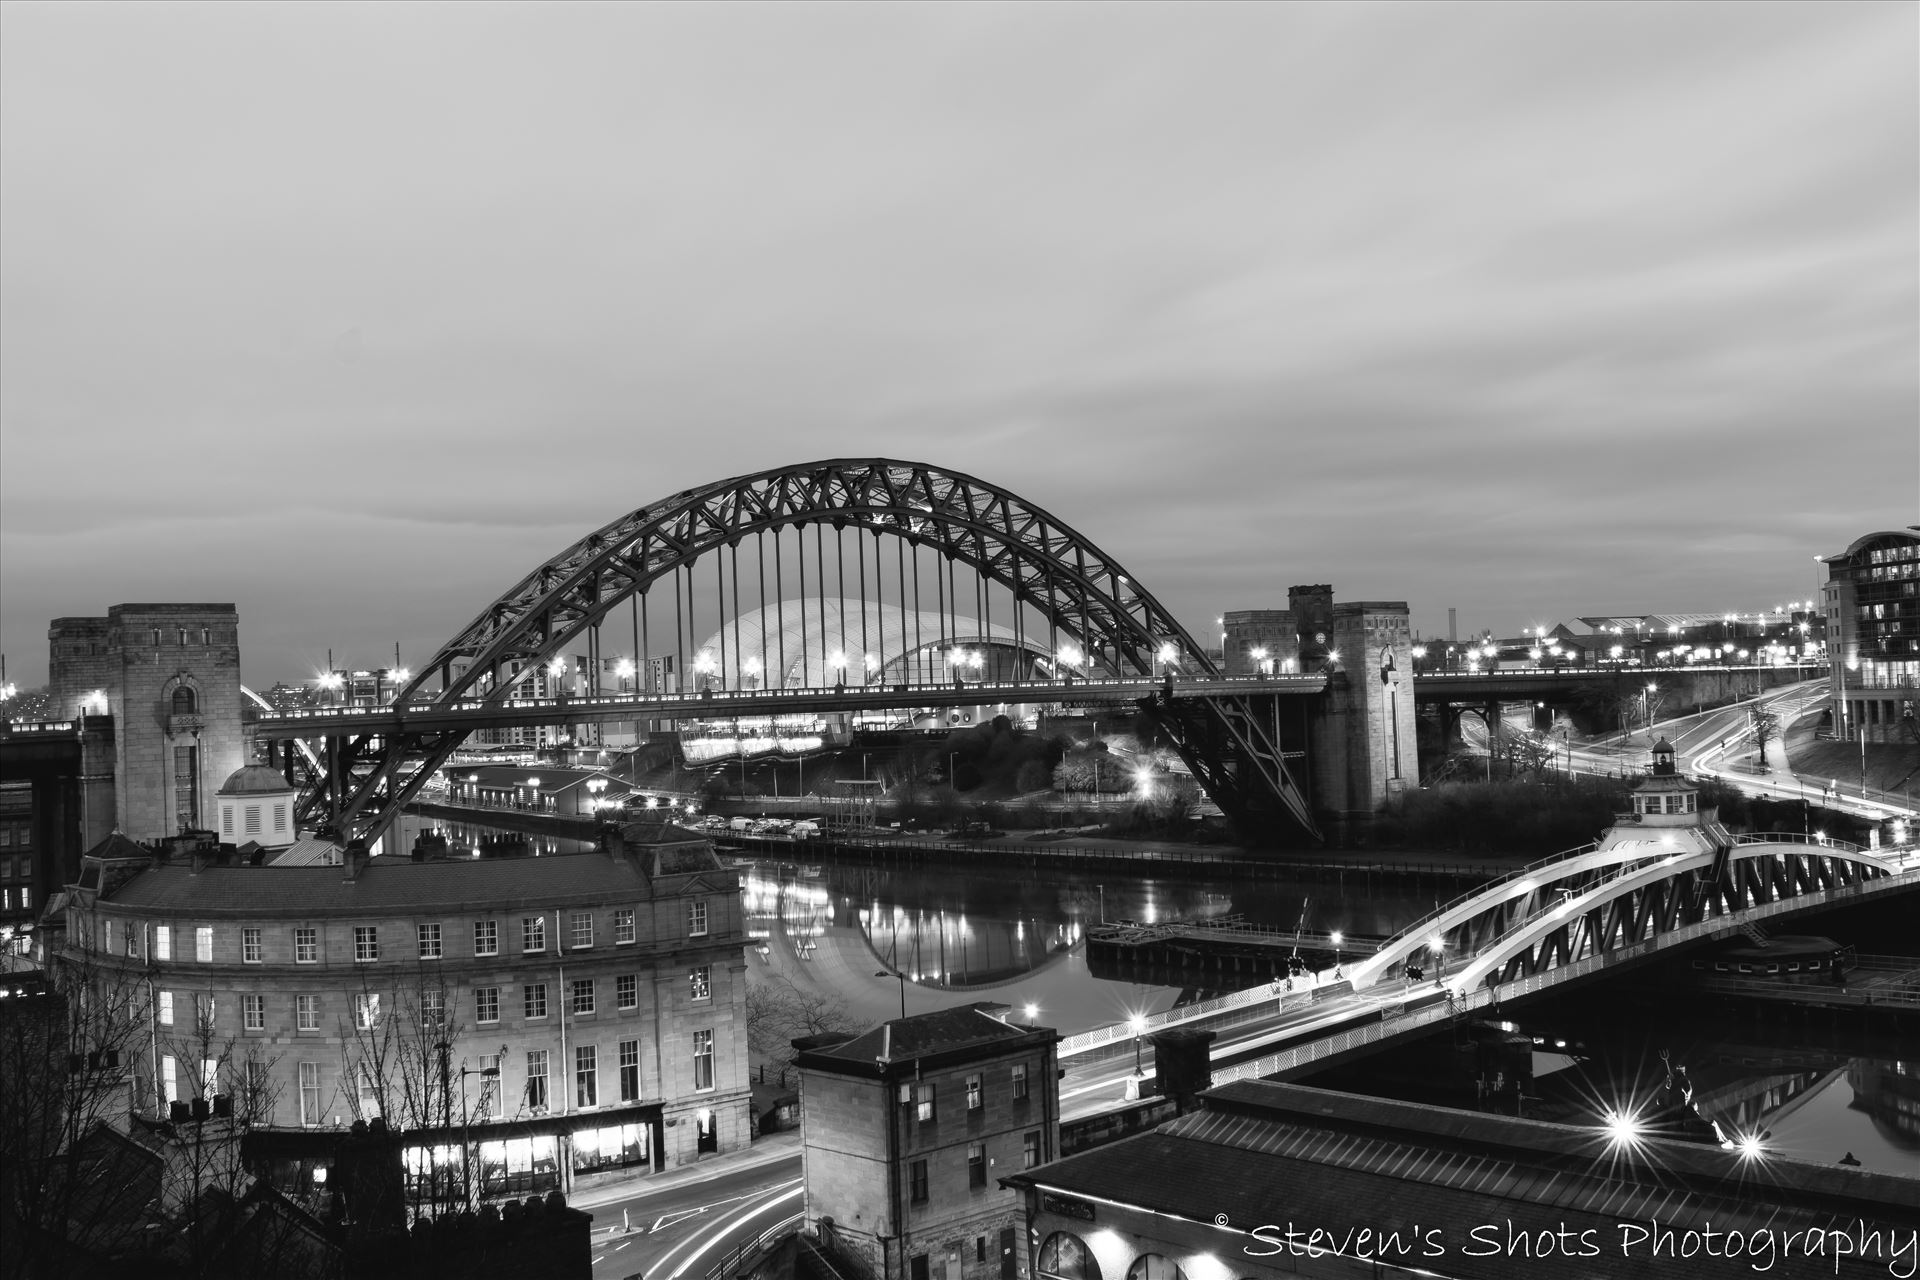 Swing bridge and Tyne bridge in black and white from the high level 6.3.18.jpg  by Steven's Shots Photography